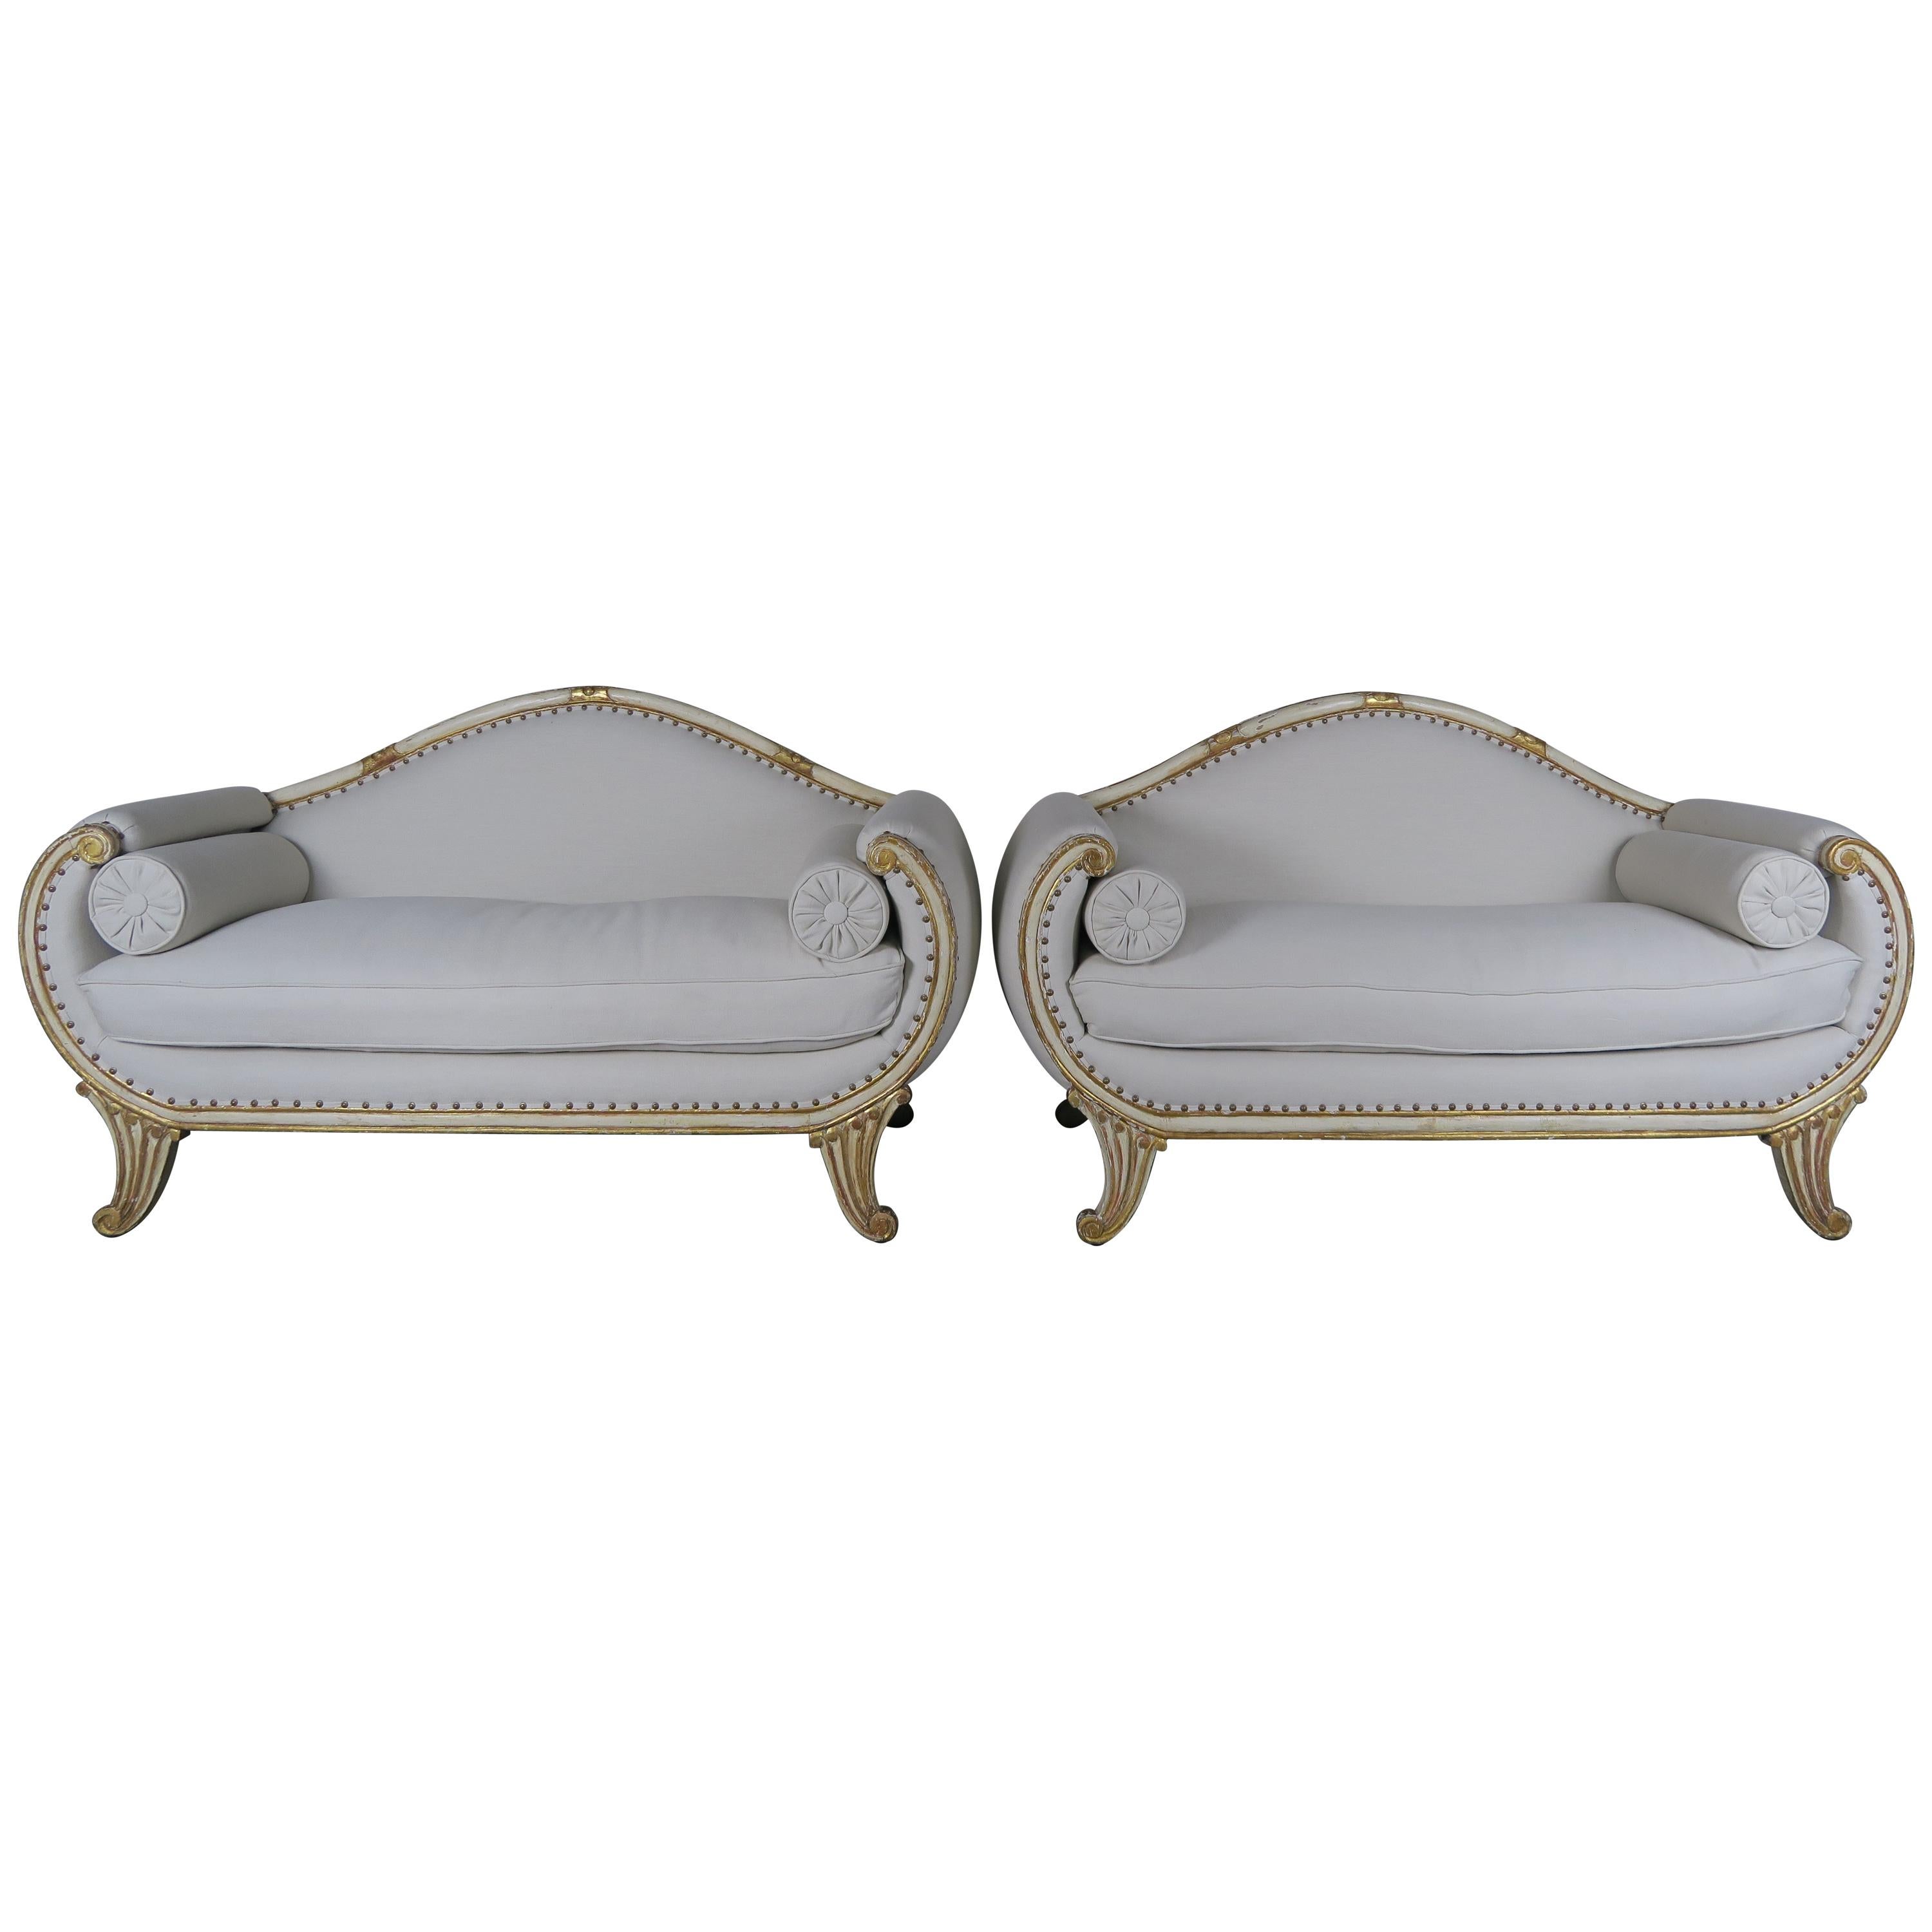 Pair of Italian Painted and Parcel Gilt Settees, circa 1900s